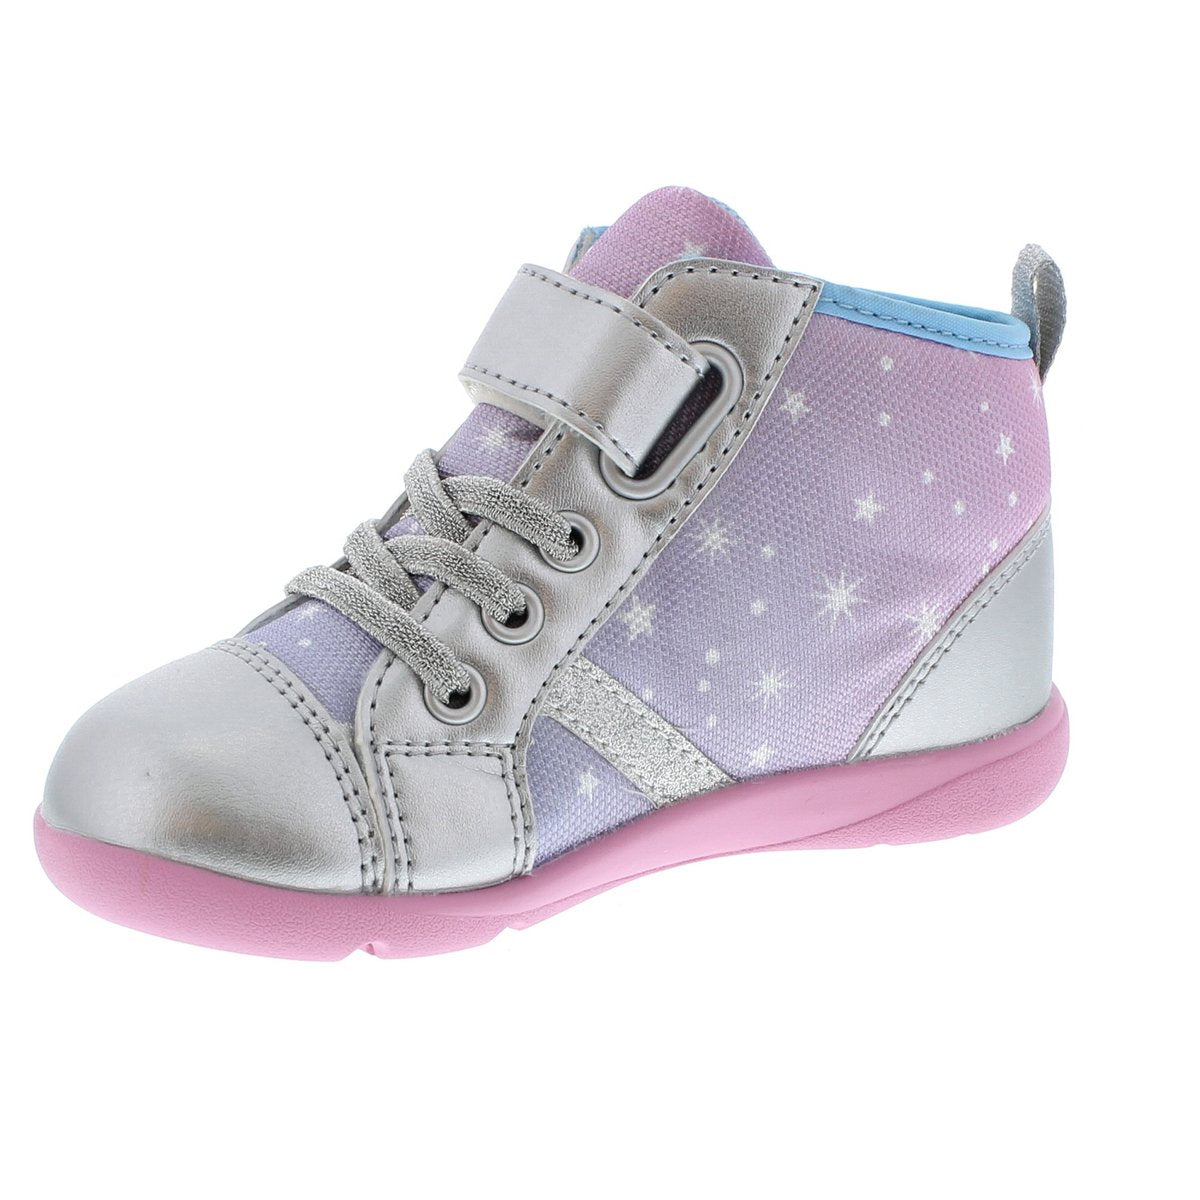 Child Tsukihoshi Star Sneaker in Silver/Pink from the front view